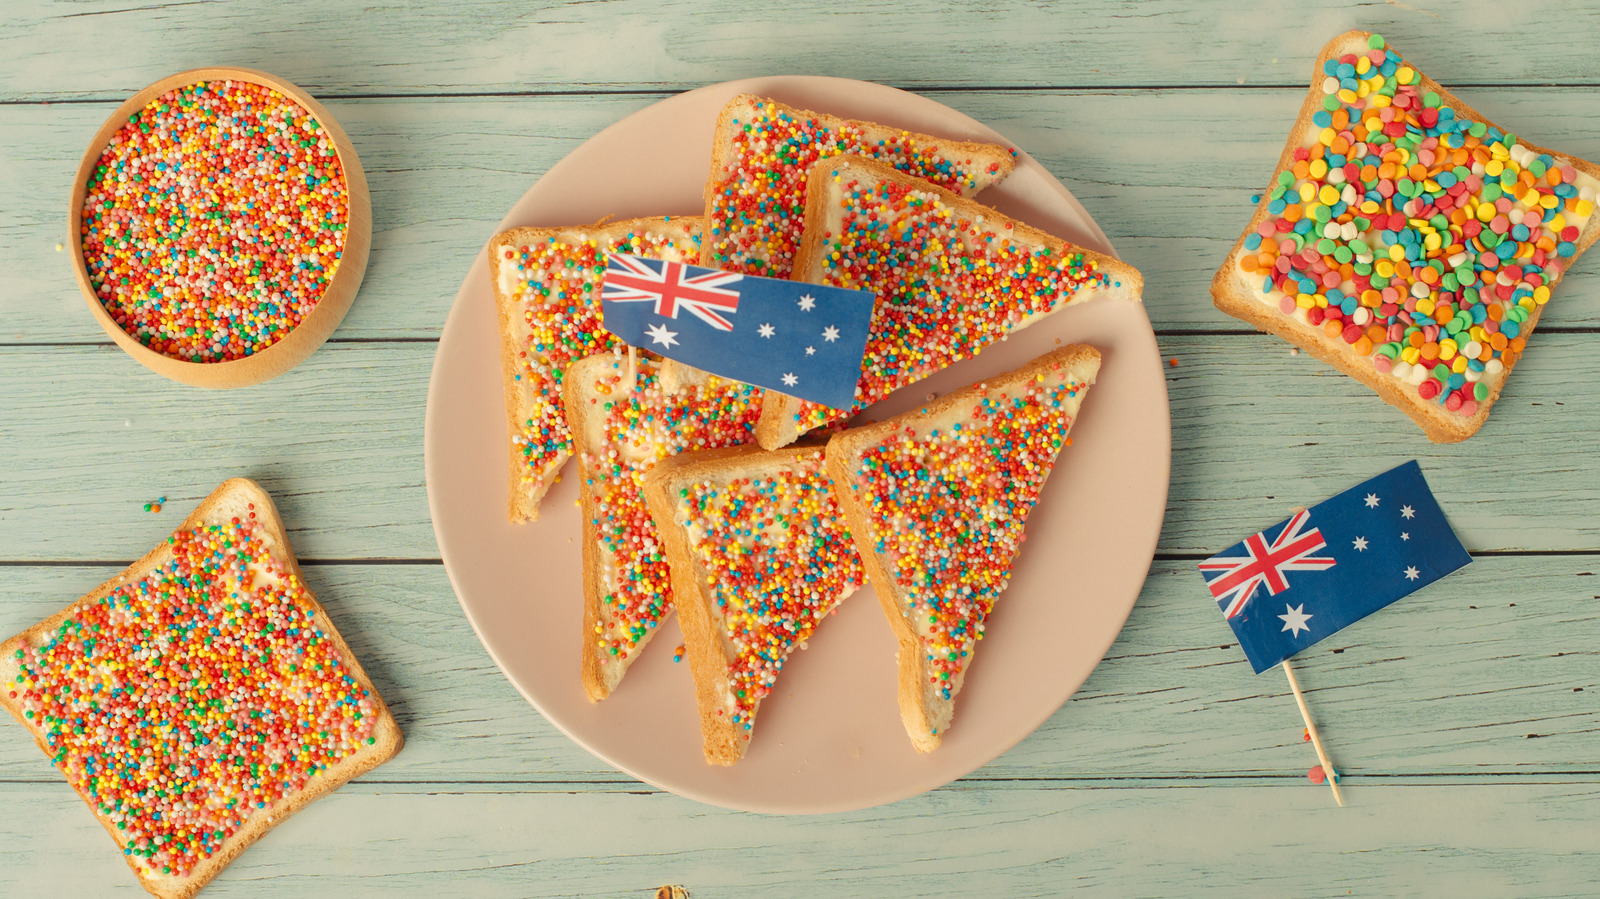 Why Do We Put Sprinkles On Fairy Bread?